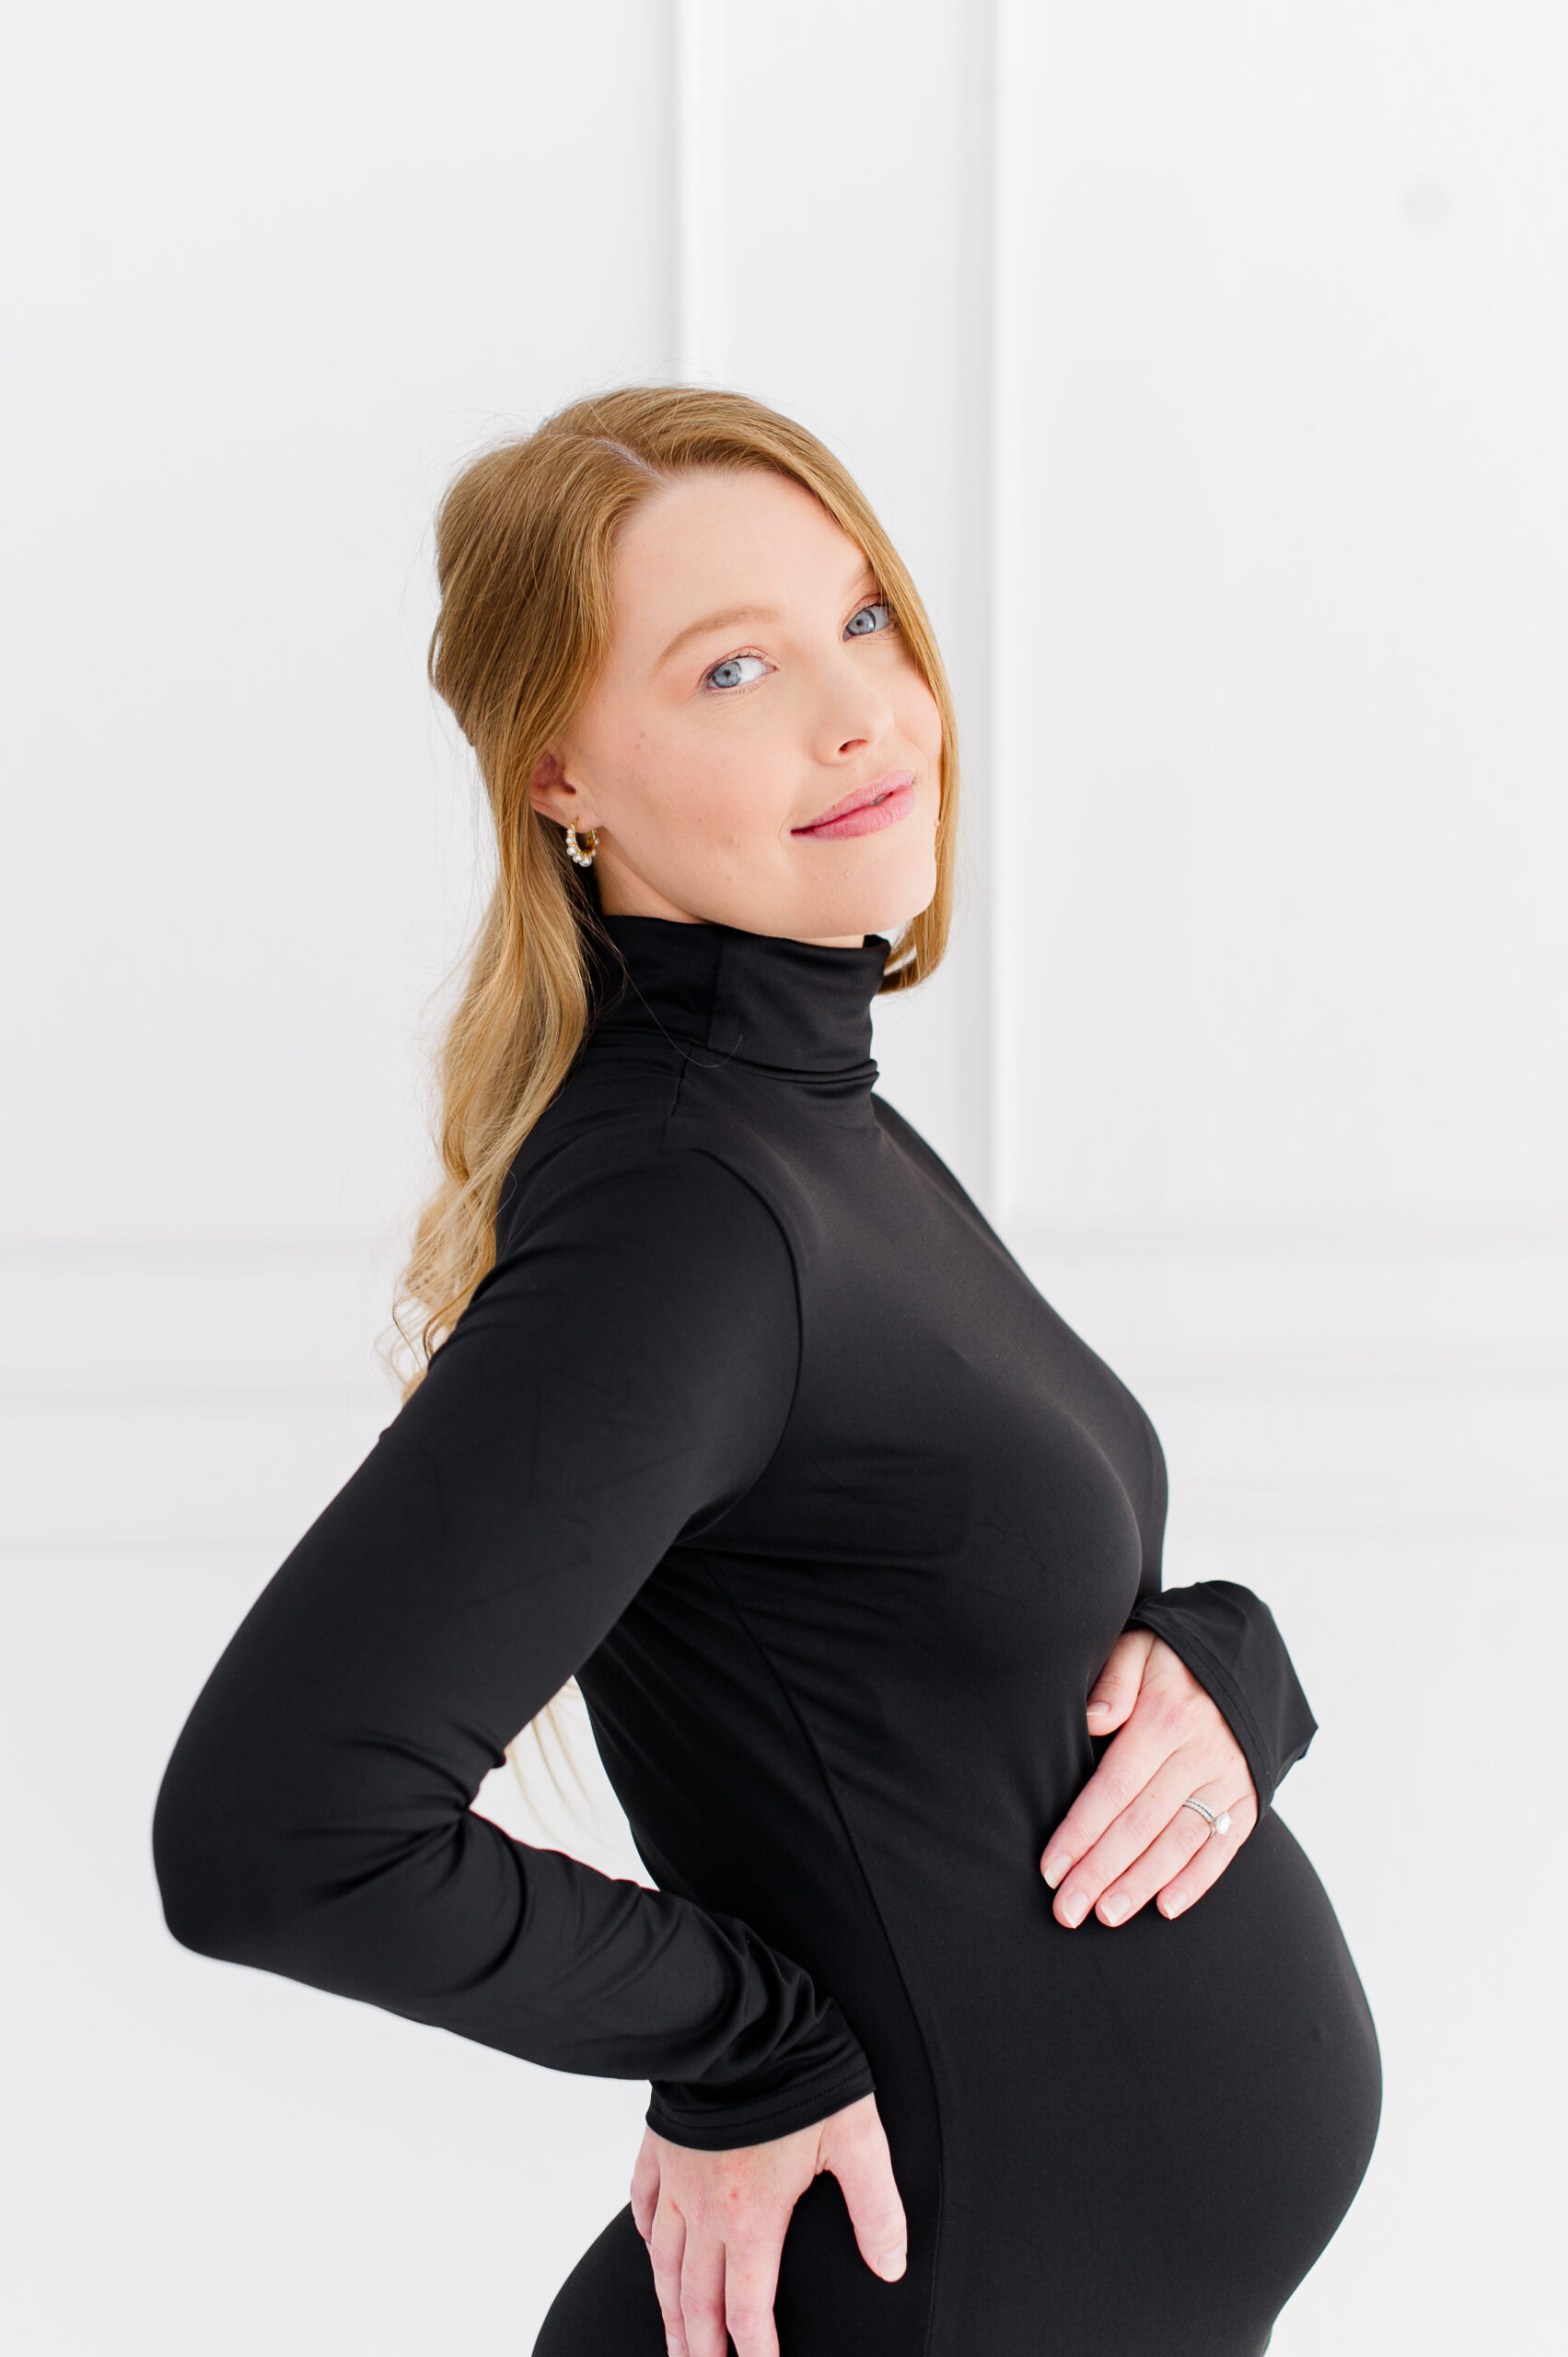 Pregnant mom holds her belly and stares straight into the camera wearing all black Sacred Birth Midwifery